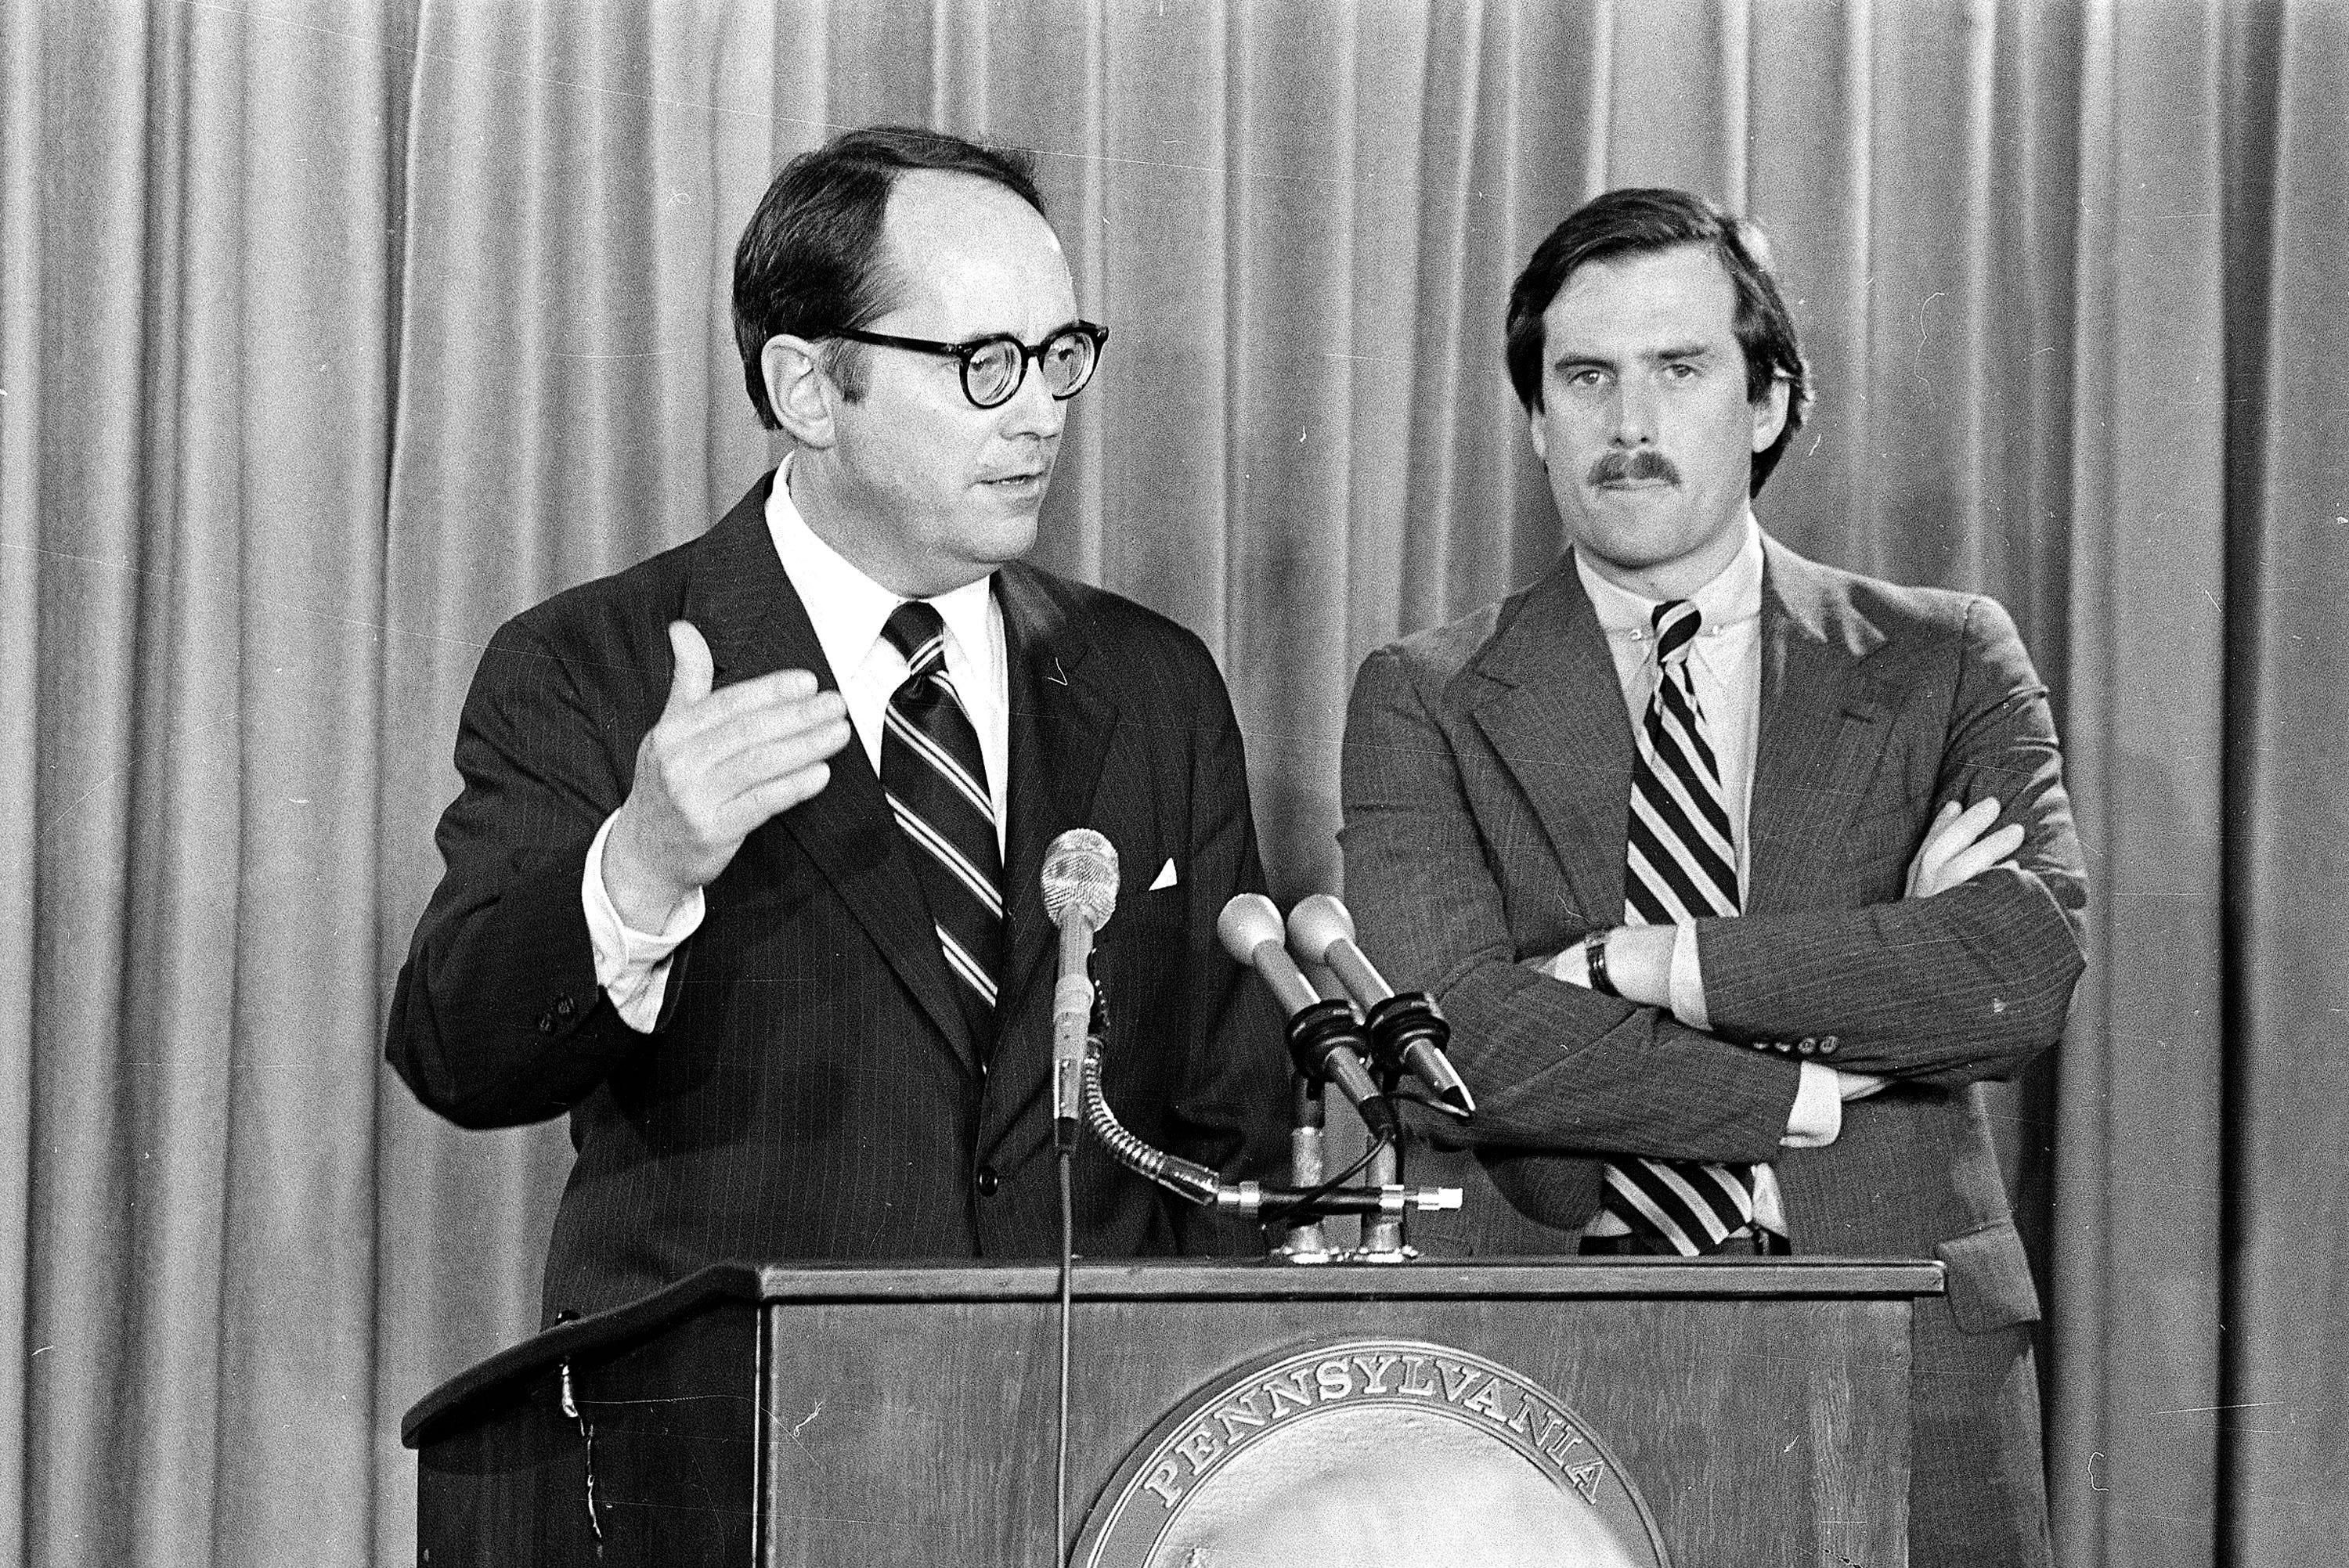 Pennsylvania Governor Dick Thornburgh, left, announces the closing of schools in the area around the Three Mile Island PWR, on March 30, 1979, in Harrisburg, Pa., after an accident at the nuclear power plant led to the release of radioactive gas from the reactor into the atmosphere. The governor advised the evacuation of small children and pregnant women. Standing at right is Lt. Gov. William Scranton. (AP Photo)